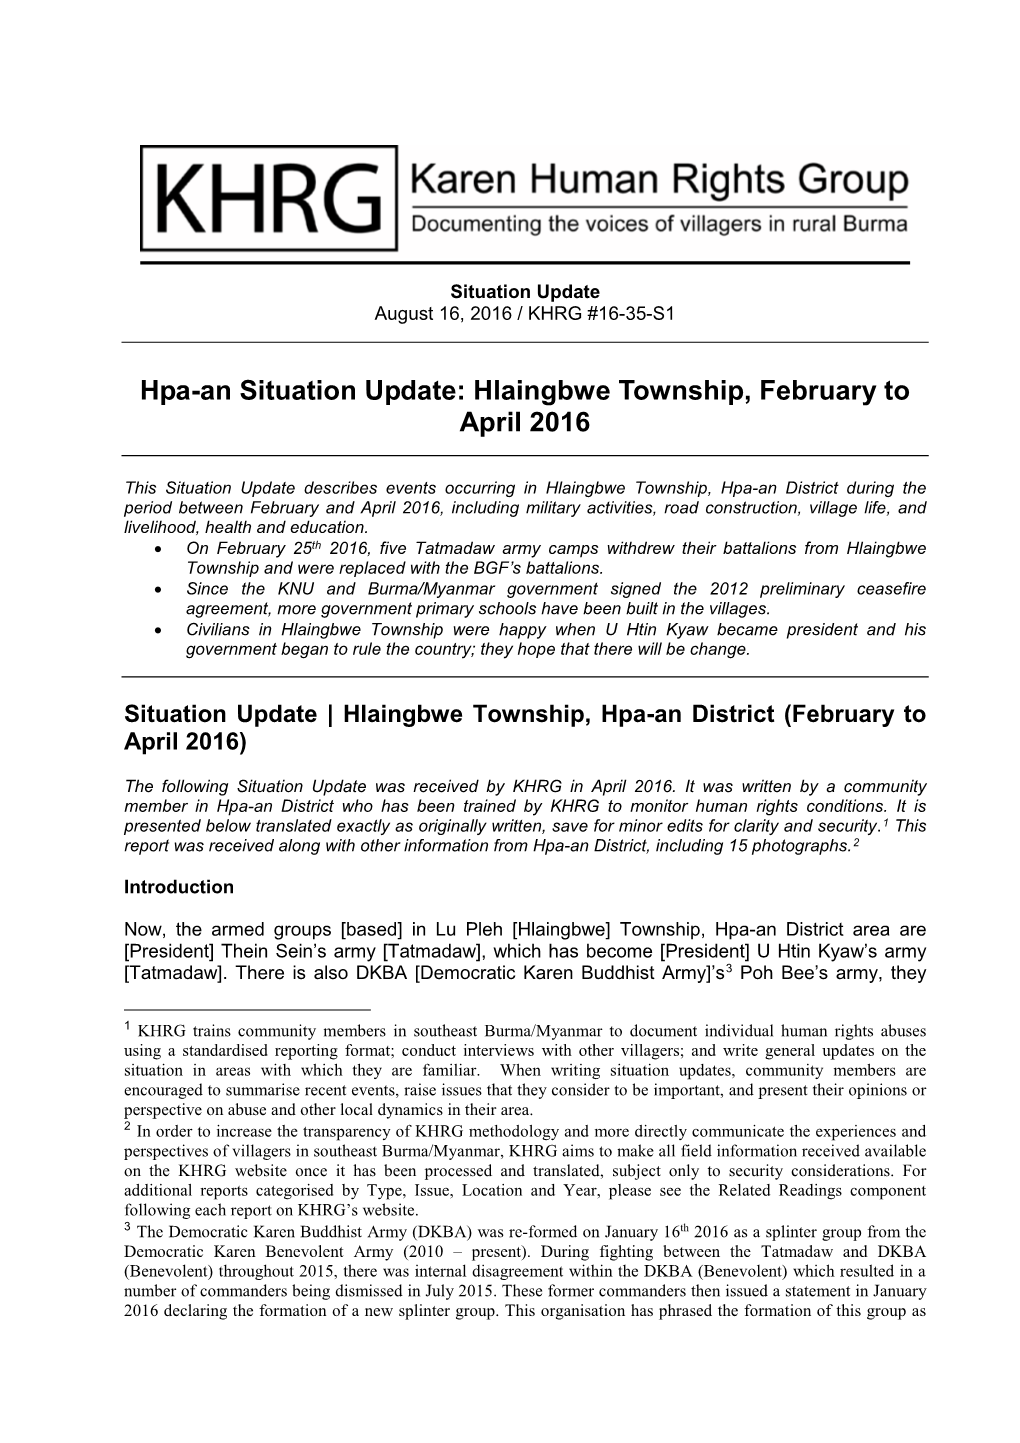 Hpa-An Situation Update: Hlaingbwe Township, February to April 2016